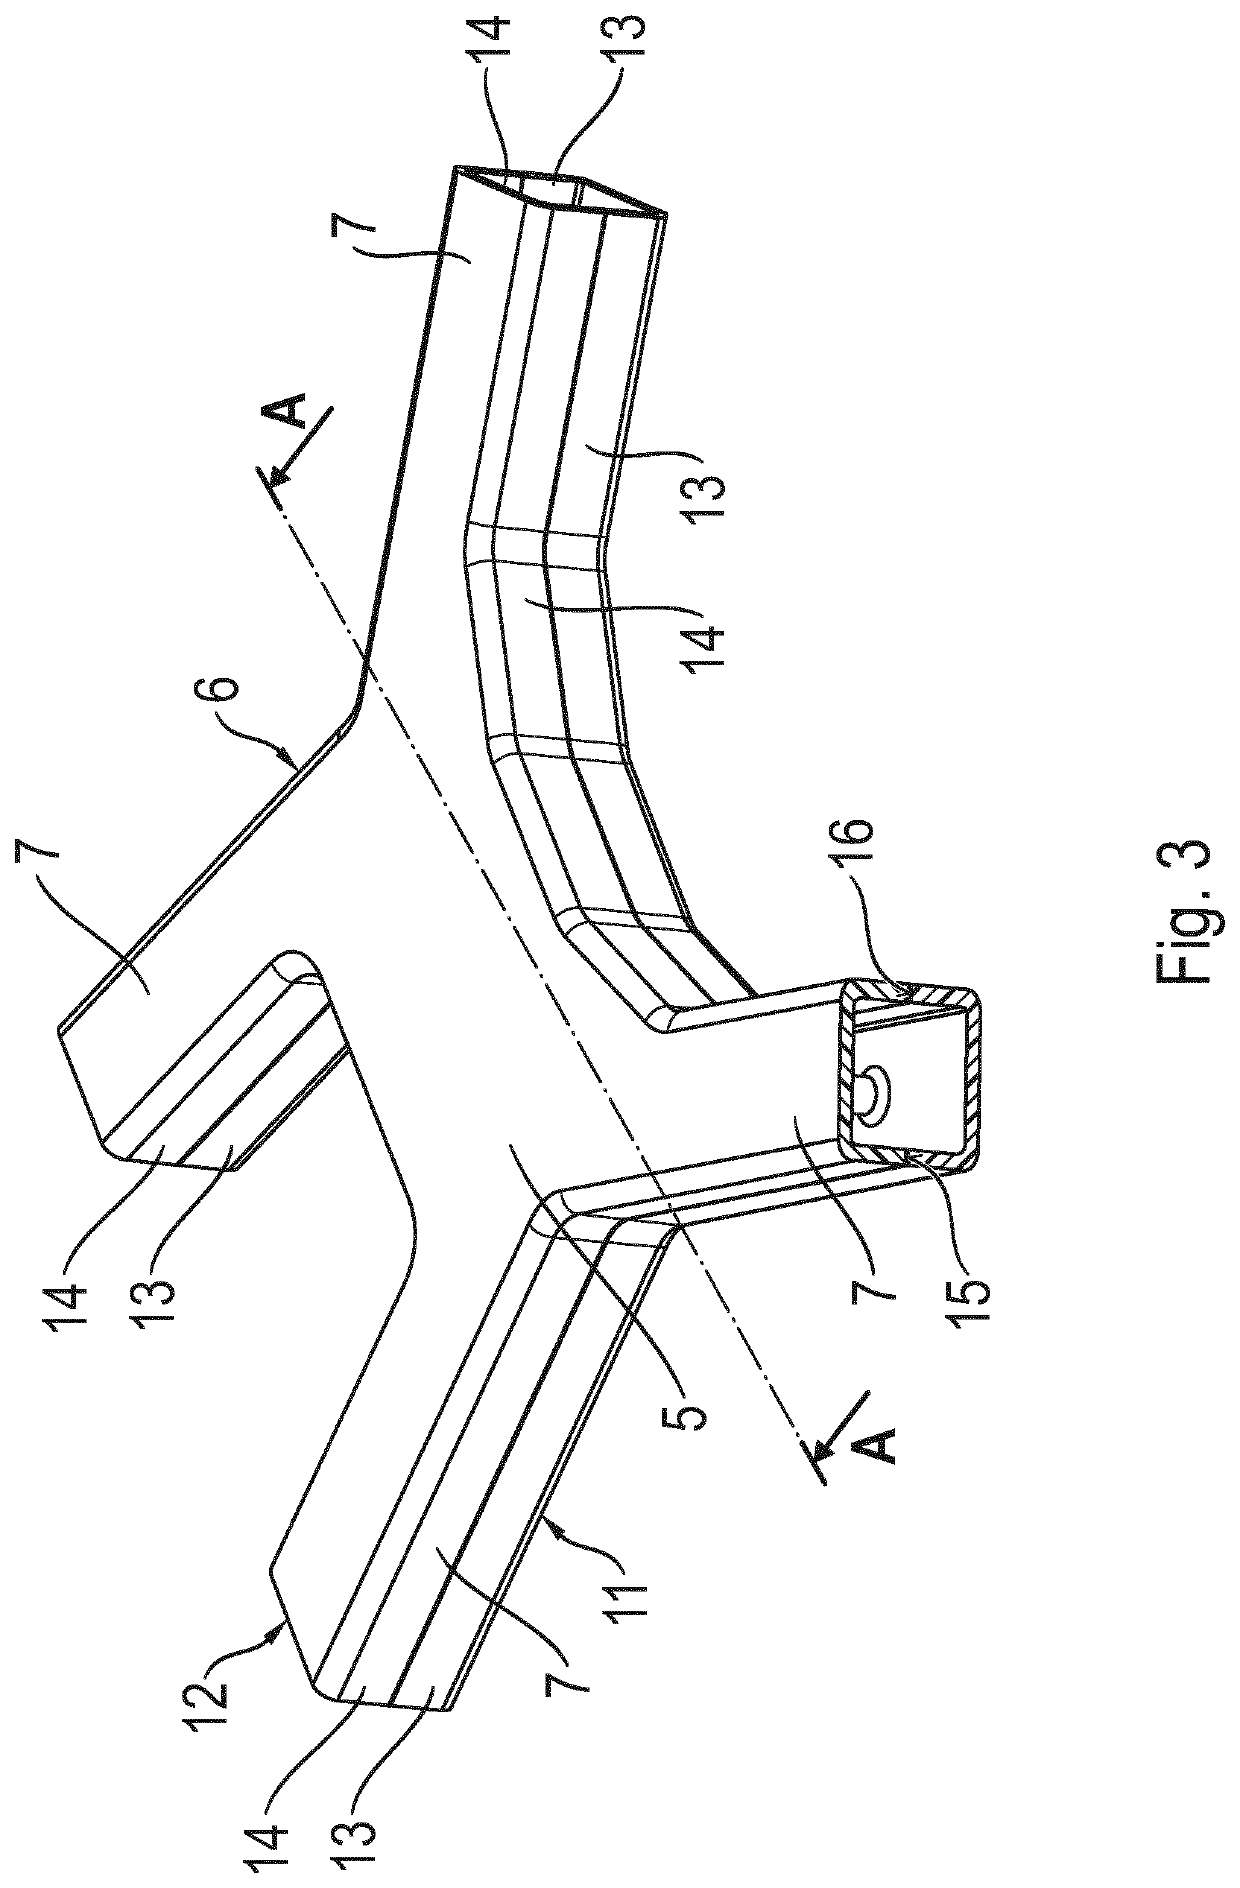 Multi-Point Link for an Undercarriage of a Vehicle